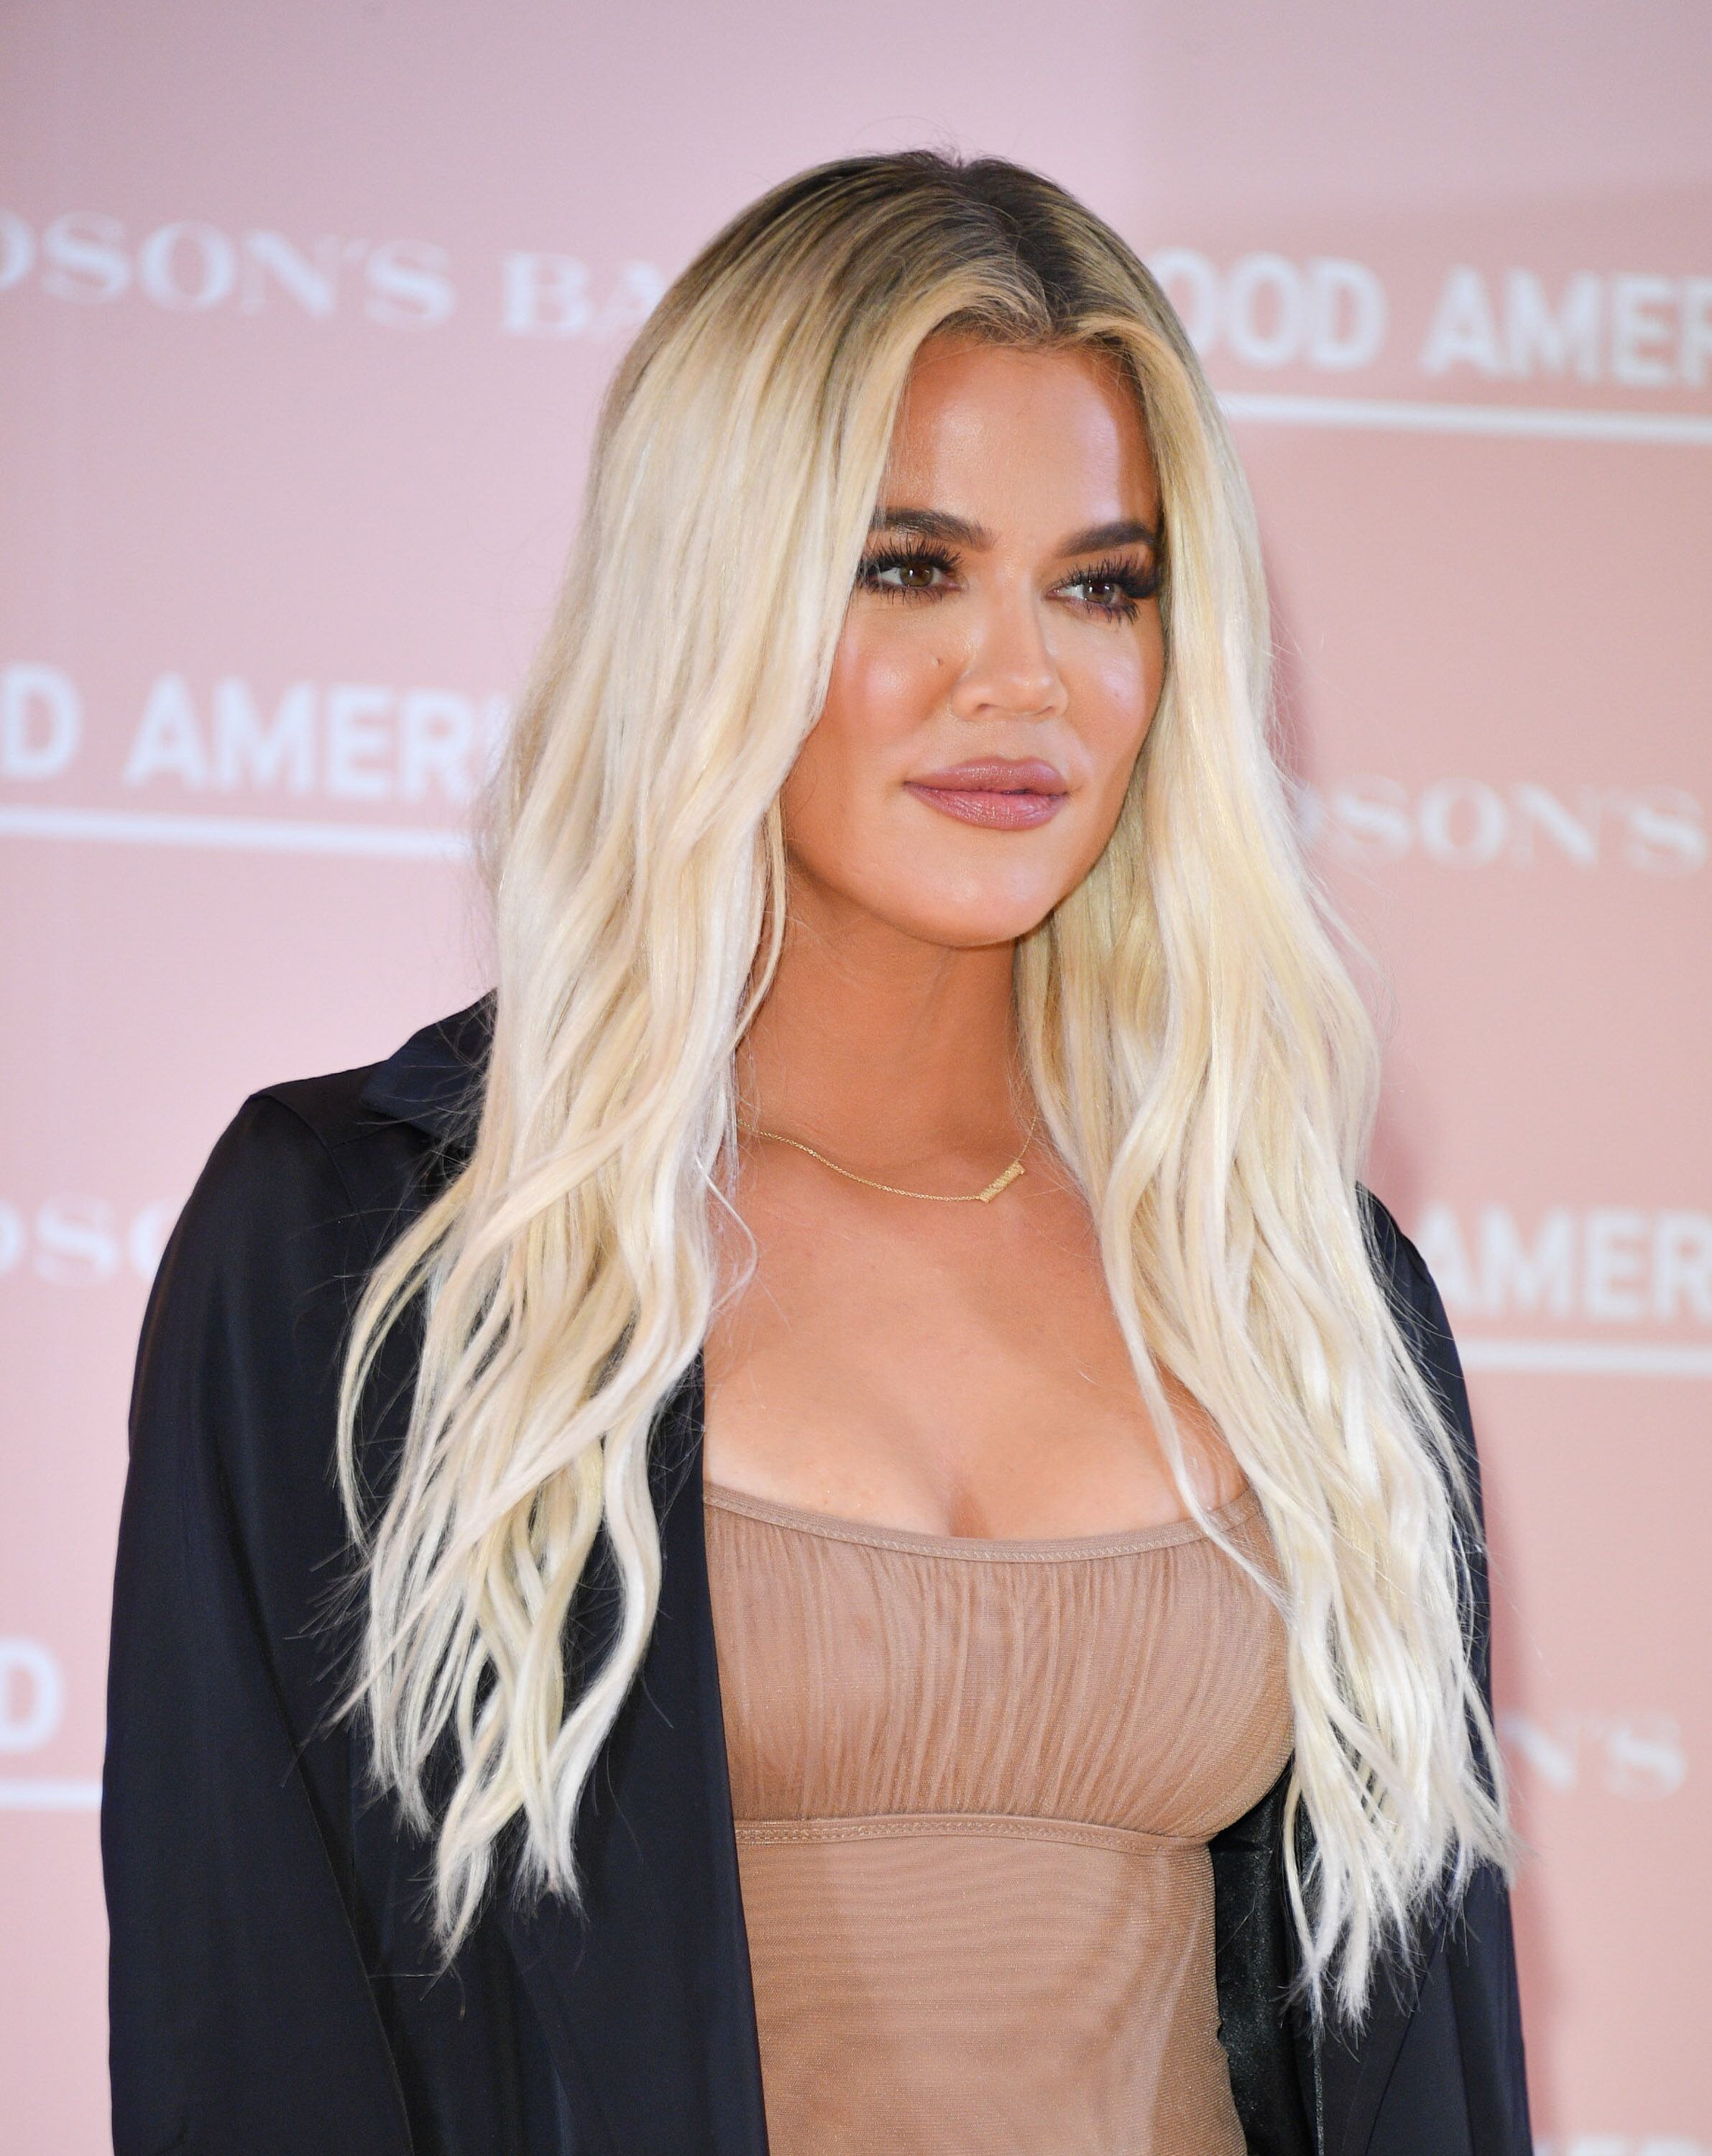 Khloe Kardashian at the launch of Good American in Toronto on September 18, 2019 | Photo: George Pimentel/Getty Images